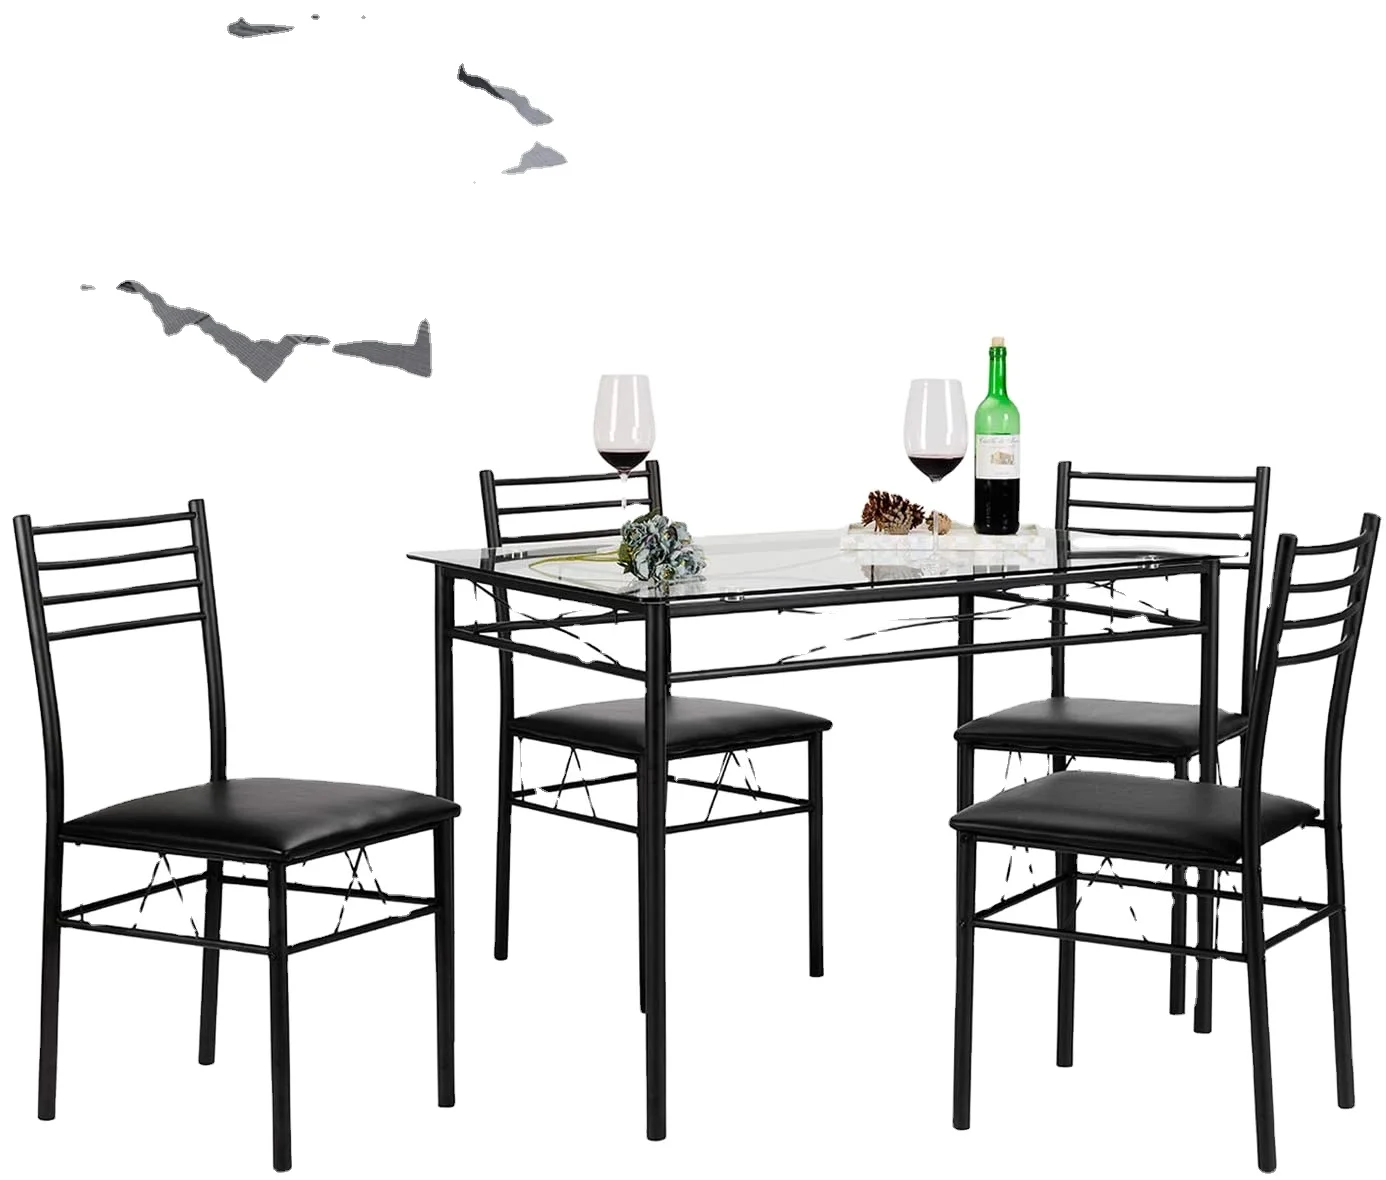 Dining Table with 4 Chairs 4 Placemats Included, practical furniture for home ,glass material